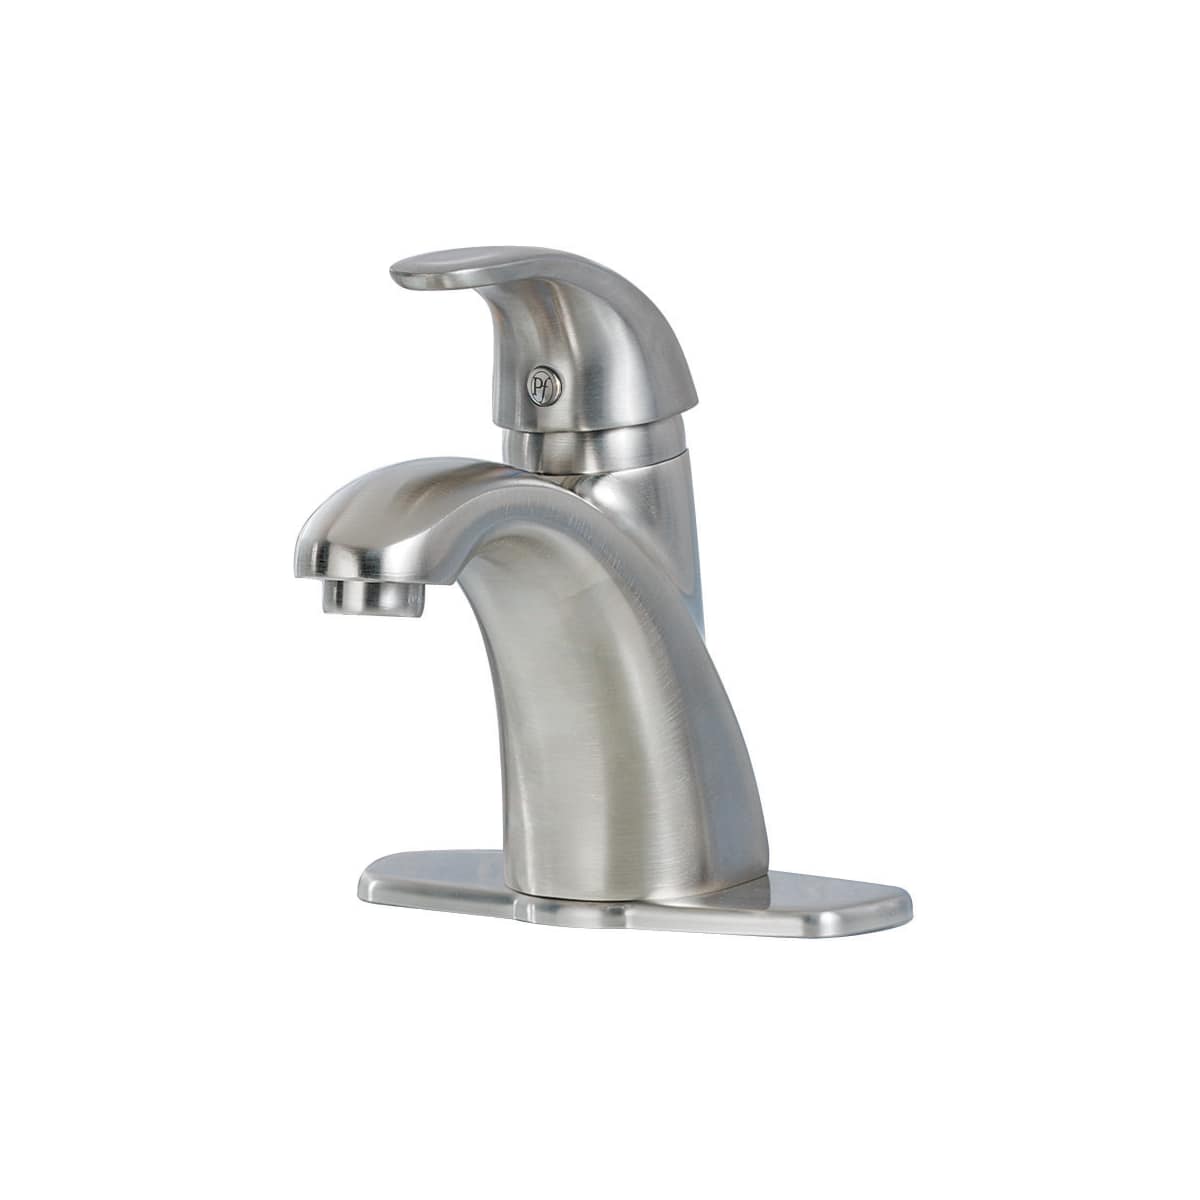 Pfister 8A2-VK00 Brushed Nickel Single Hole Bathroom Sink Faucet - Faucet.com